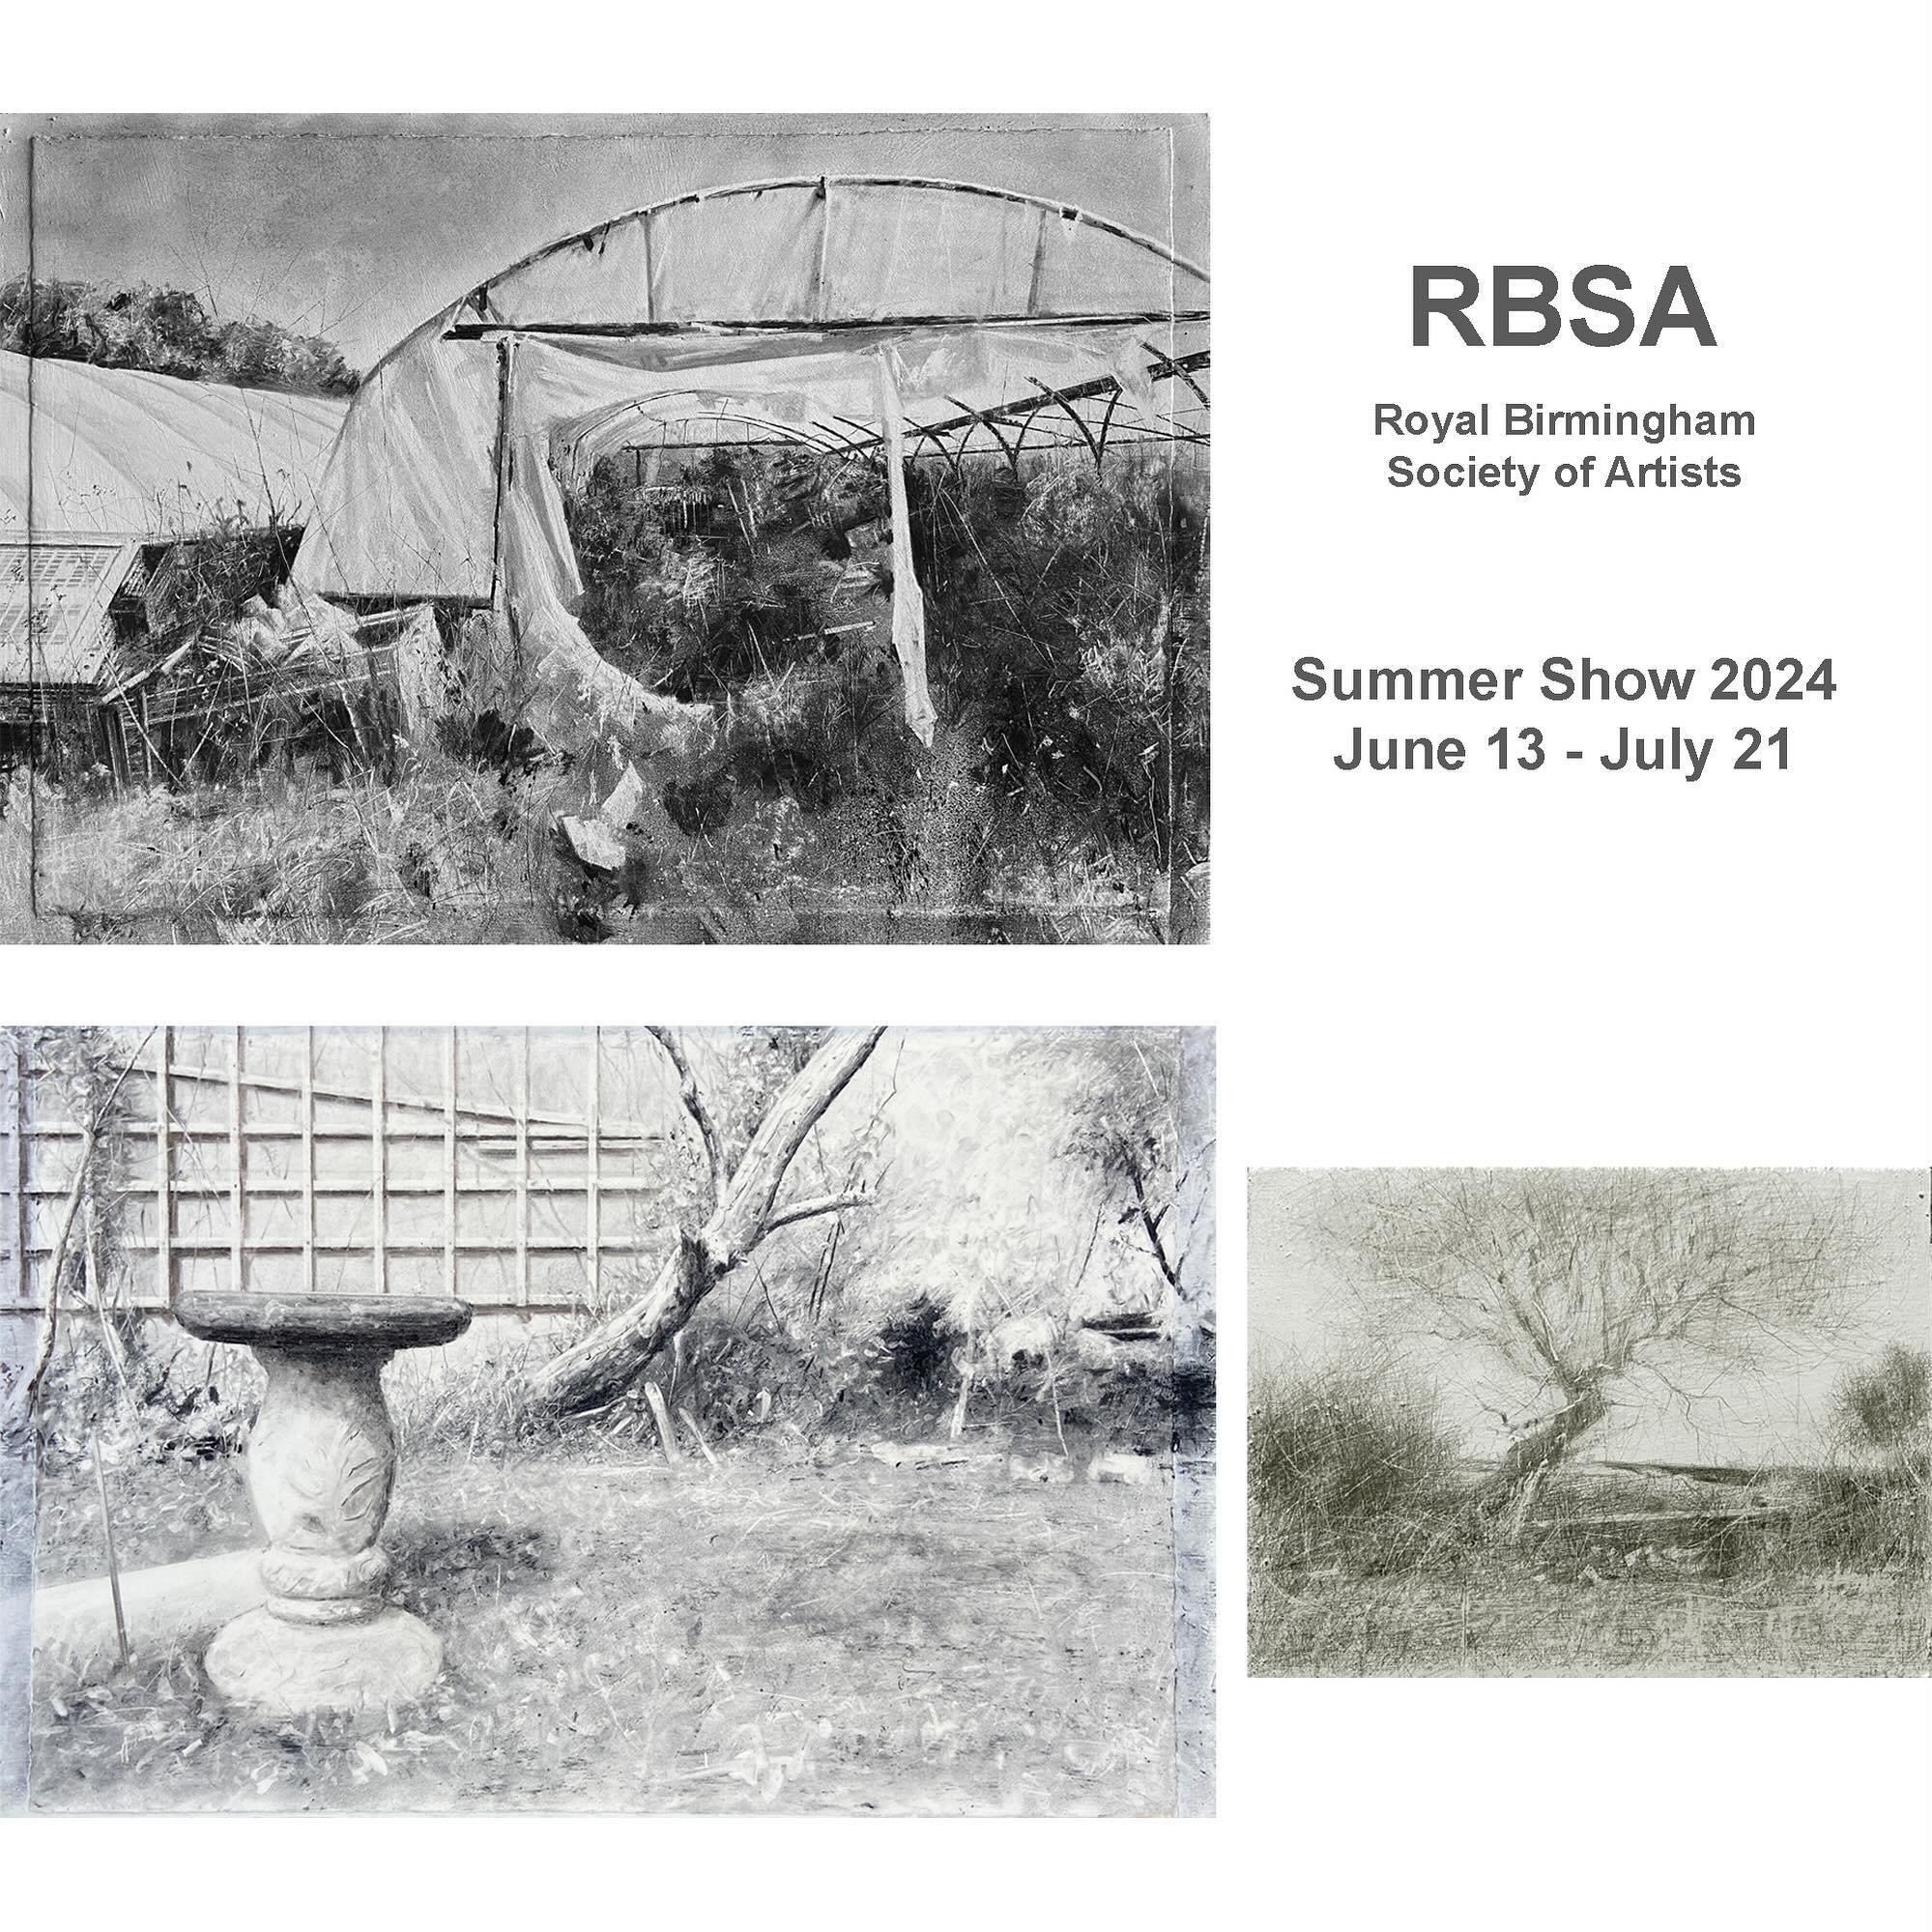 Very pleased to receive news that my 3 drawings have been accepted into the @rbsagallery Summer Show 
.
#rbsa #birmingham #birminghamuk🇬🇧 #galleryartist #drawing #drawings #charcoaldrawing #drawingartist #drawingsketch #drawingoftheday #drawingart 